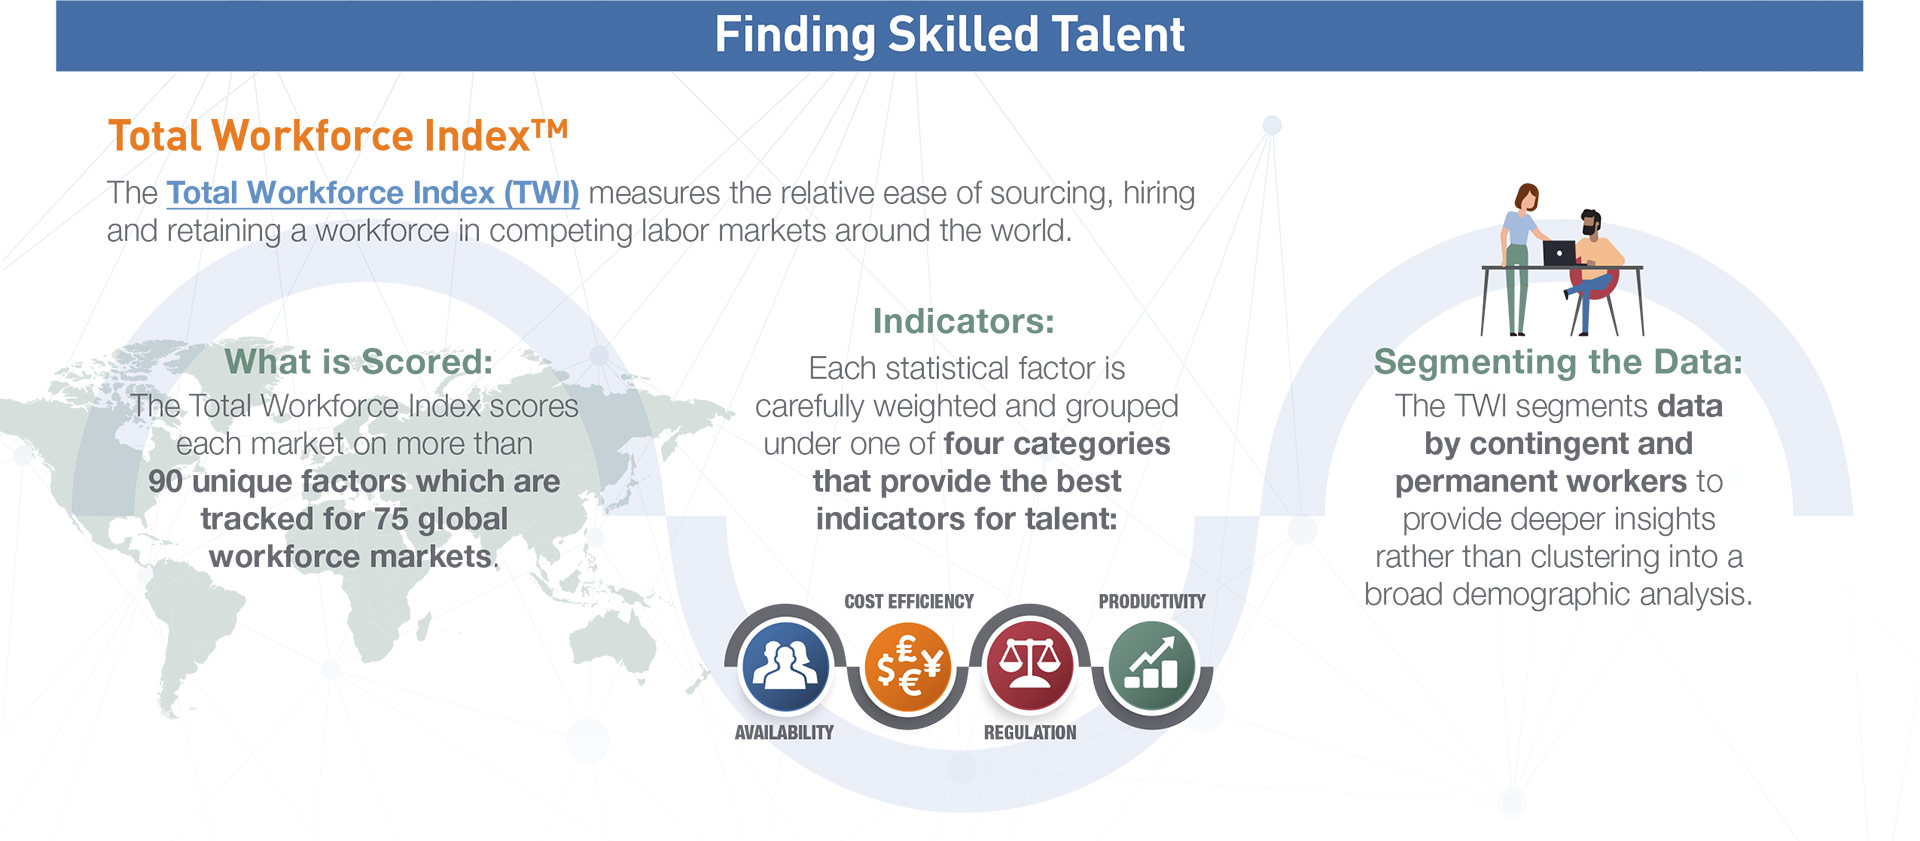 Finding Skilled Talent